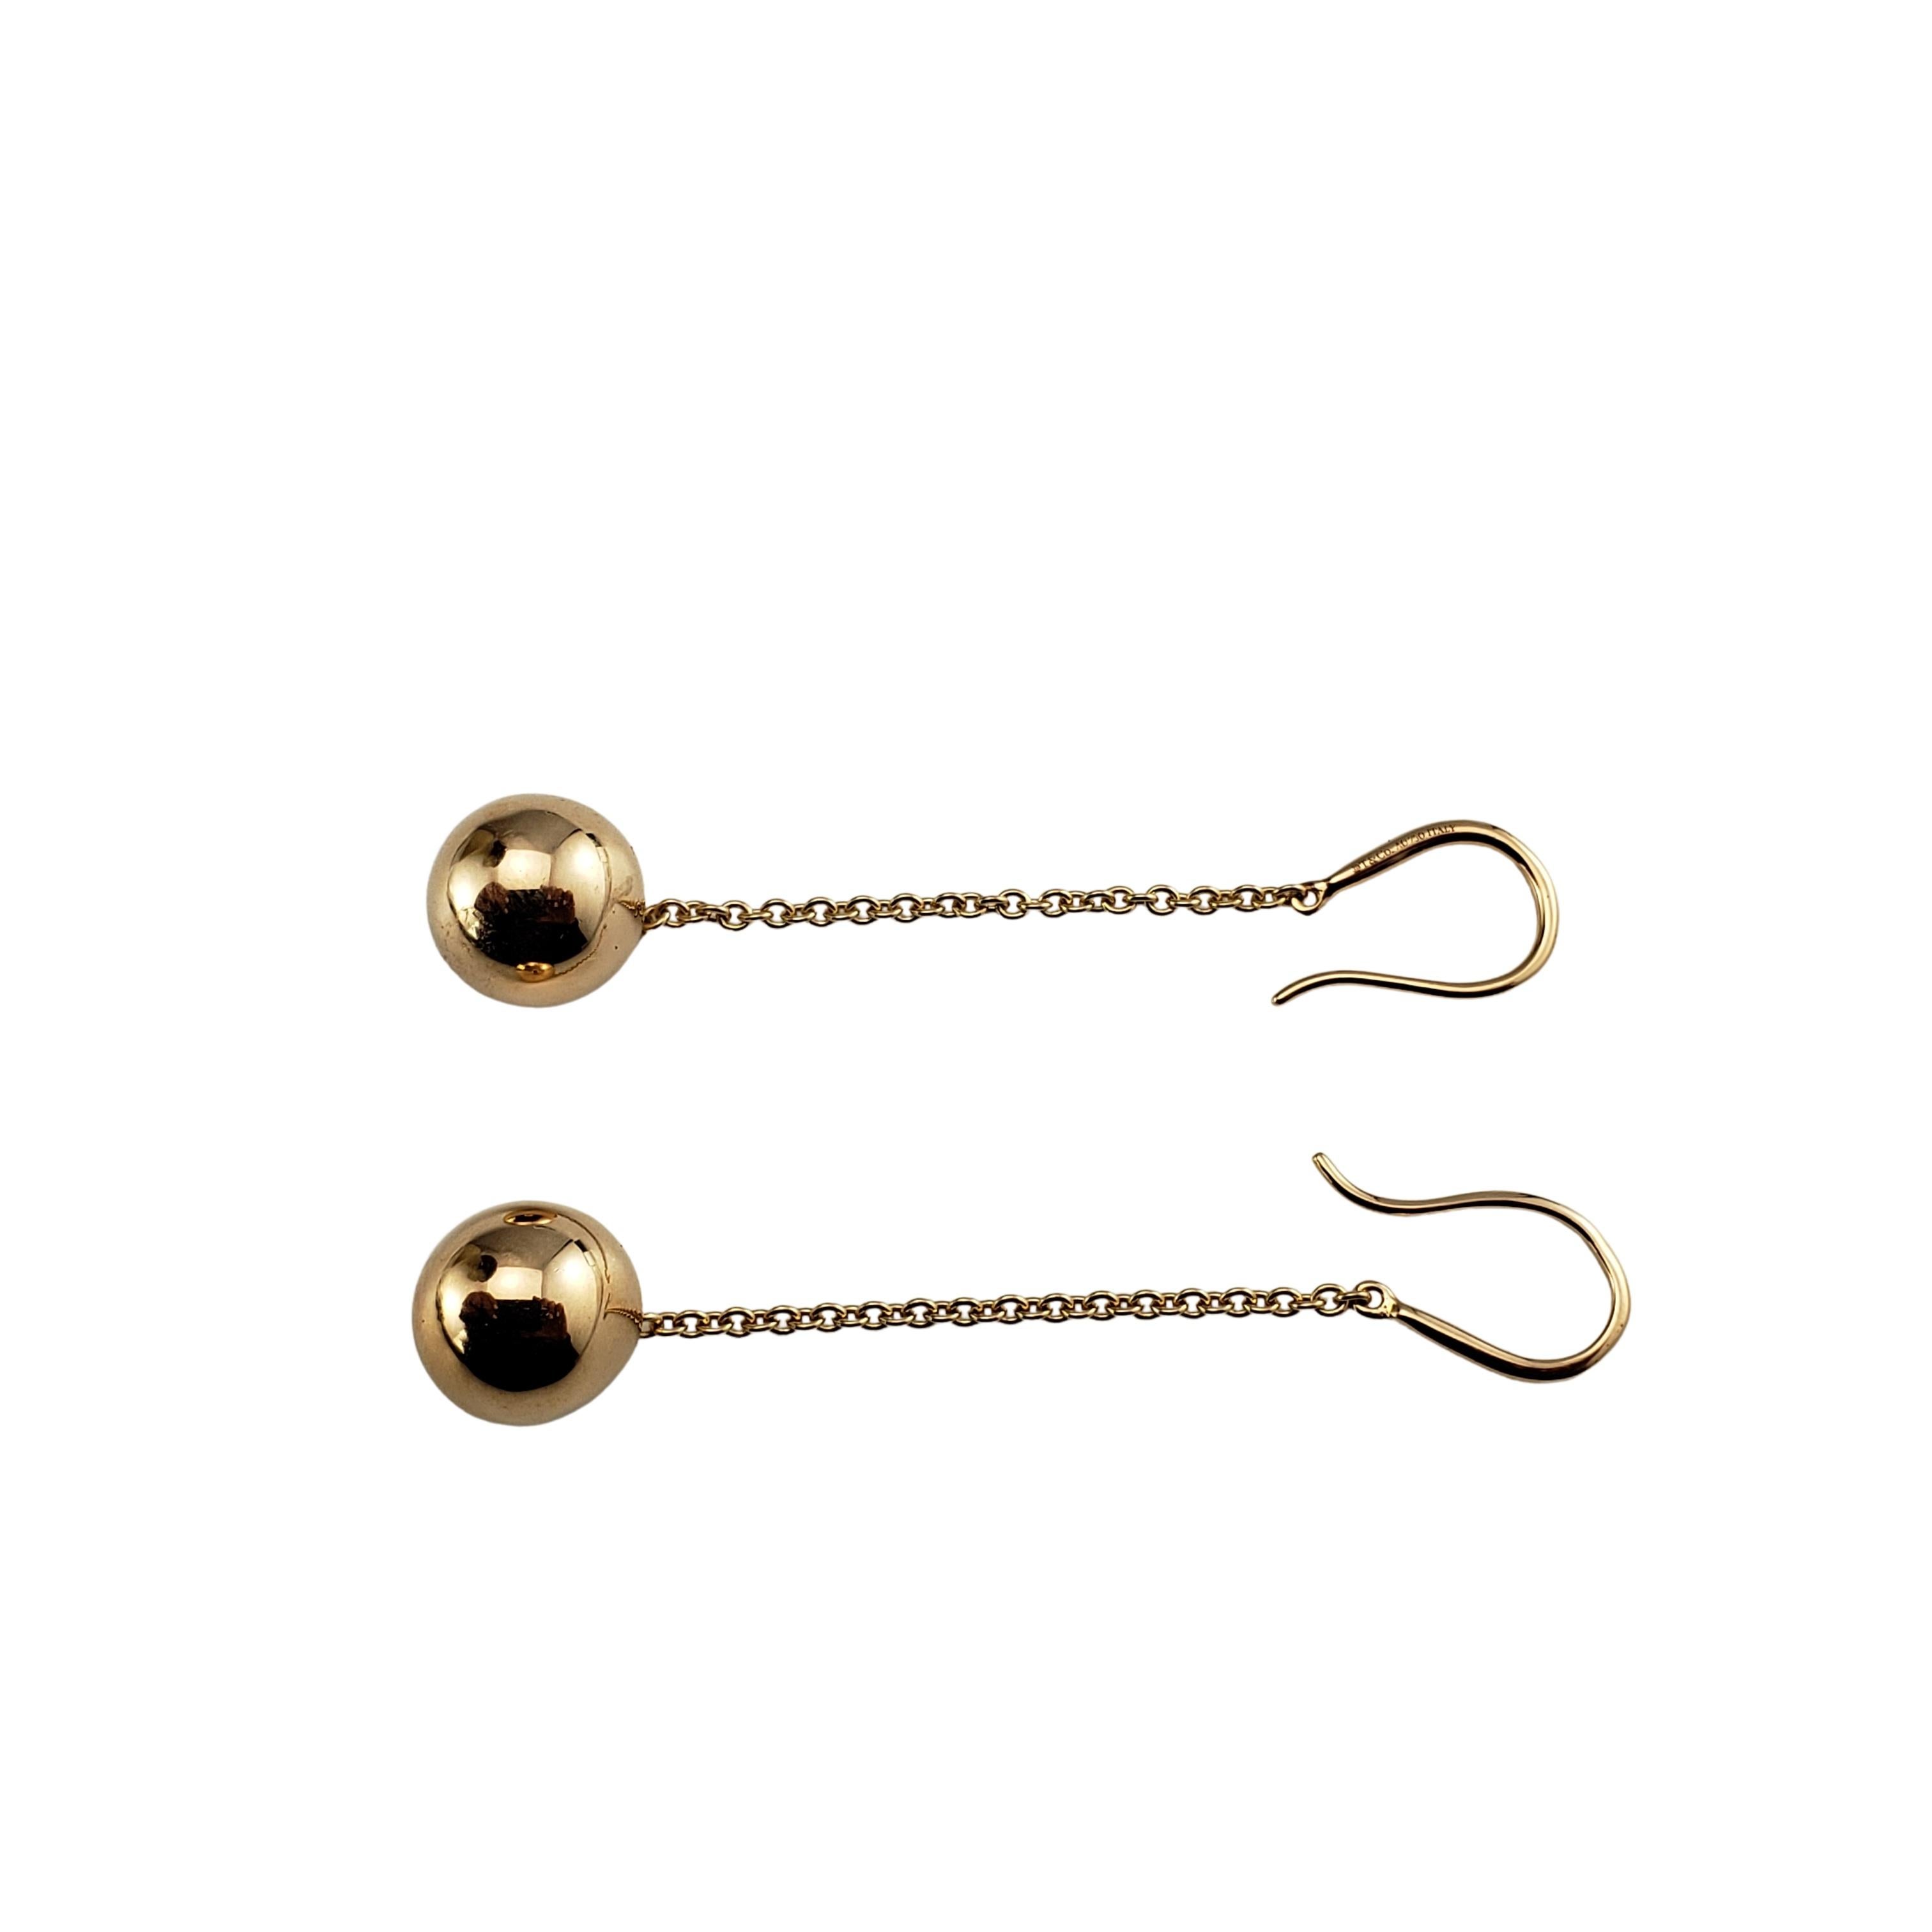 Vintage Tiffany & Co 18 Karat Yellow Gold Ball Hook Drop Earrings-

These timeless 18K yellow gold drop earrings by Tiffany and Co. features a polished gold ball suspended from a delicate hook and chain.

Size:  2 inches (drop)
          10 mm